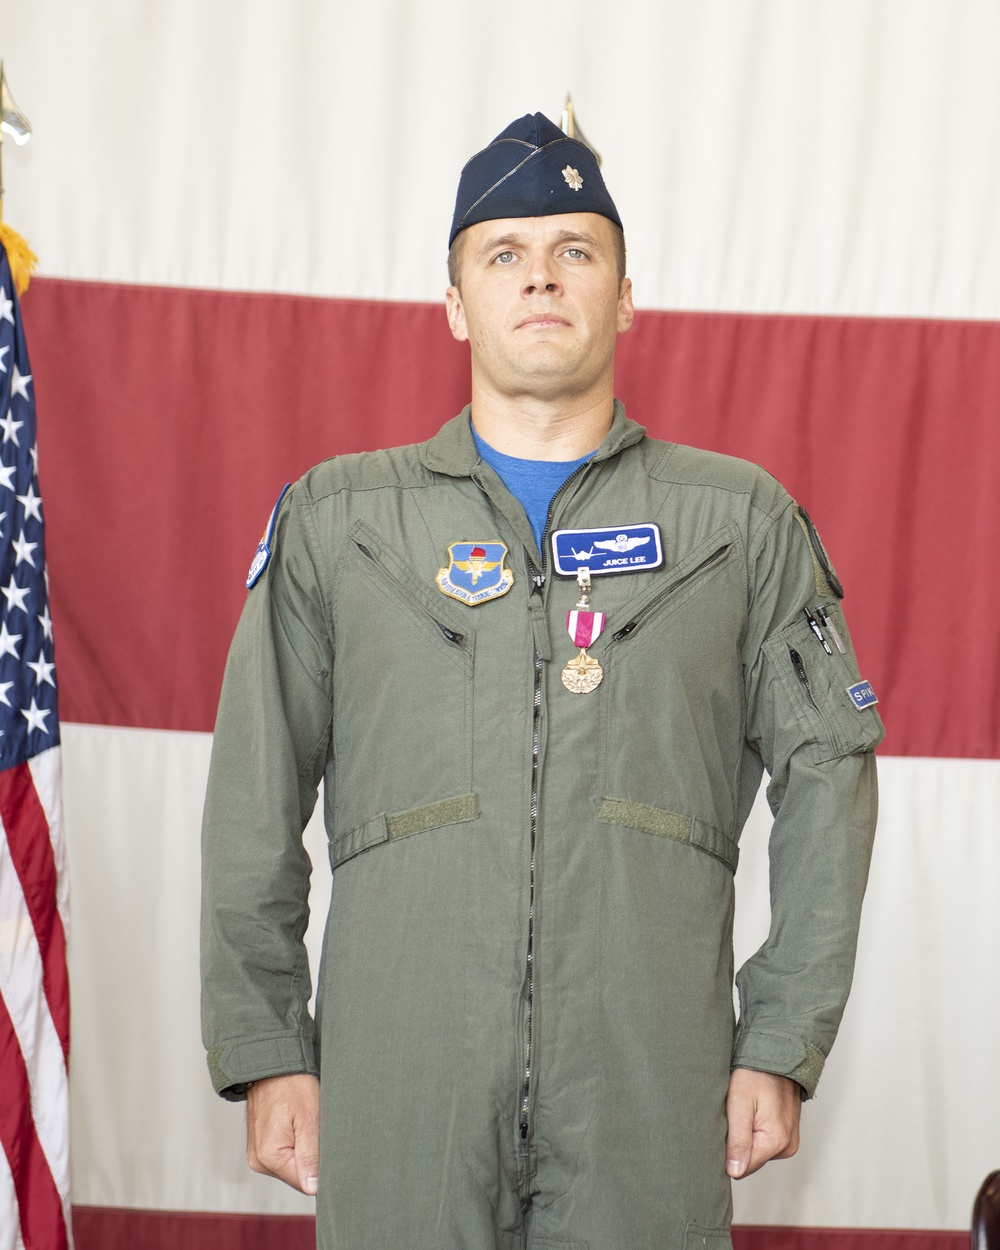 62nd Fighter Squadron Change of Command Ceremony